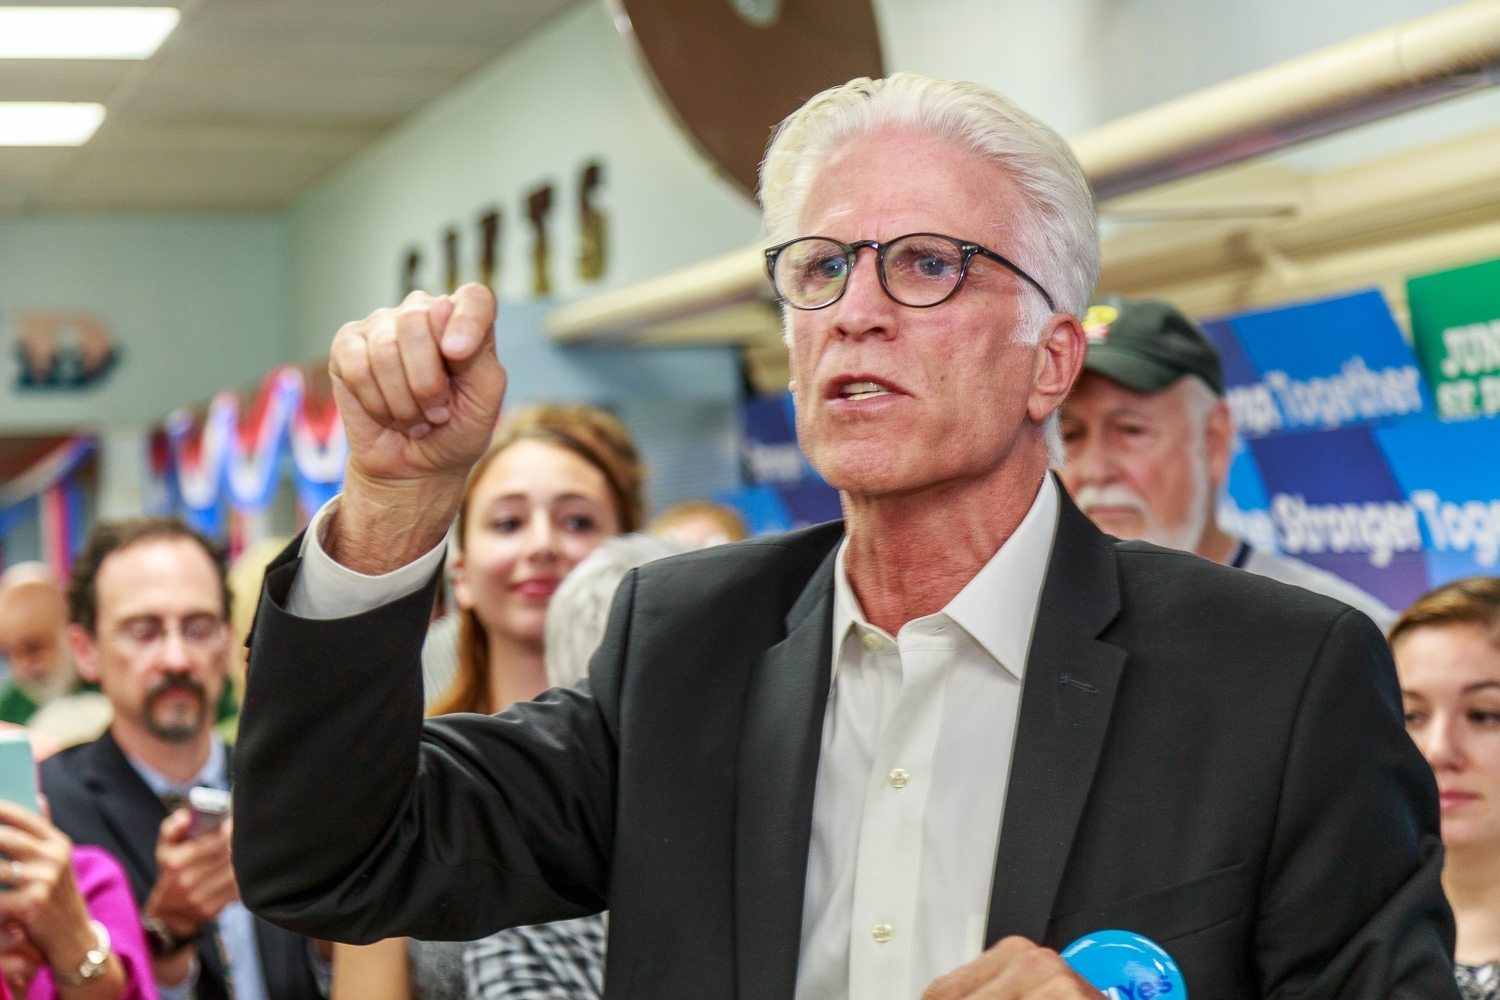 Lancaster, PA, USA / October 3, 2016: There were plenty of cheers for Actor Ted Danson as he helped open the new Lancaster campaign office for Hillary Clinton.